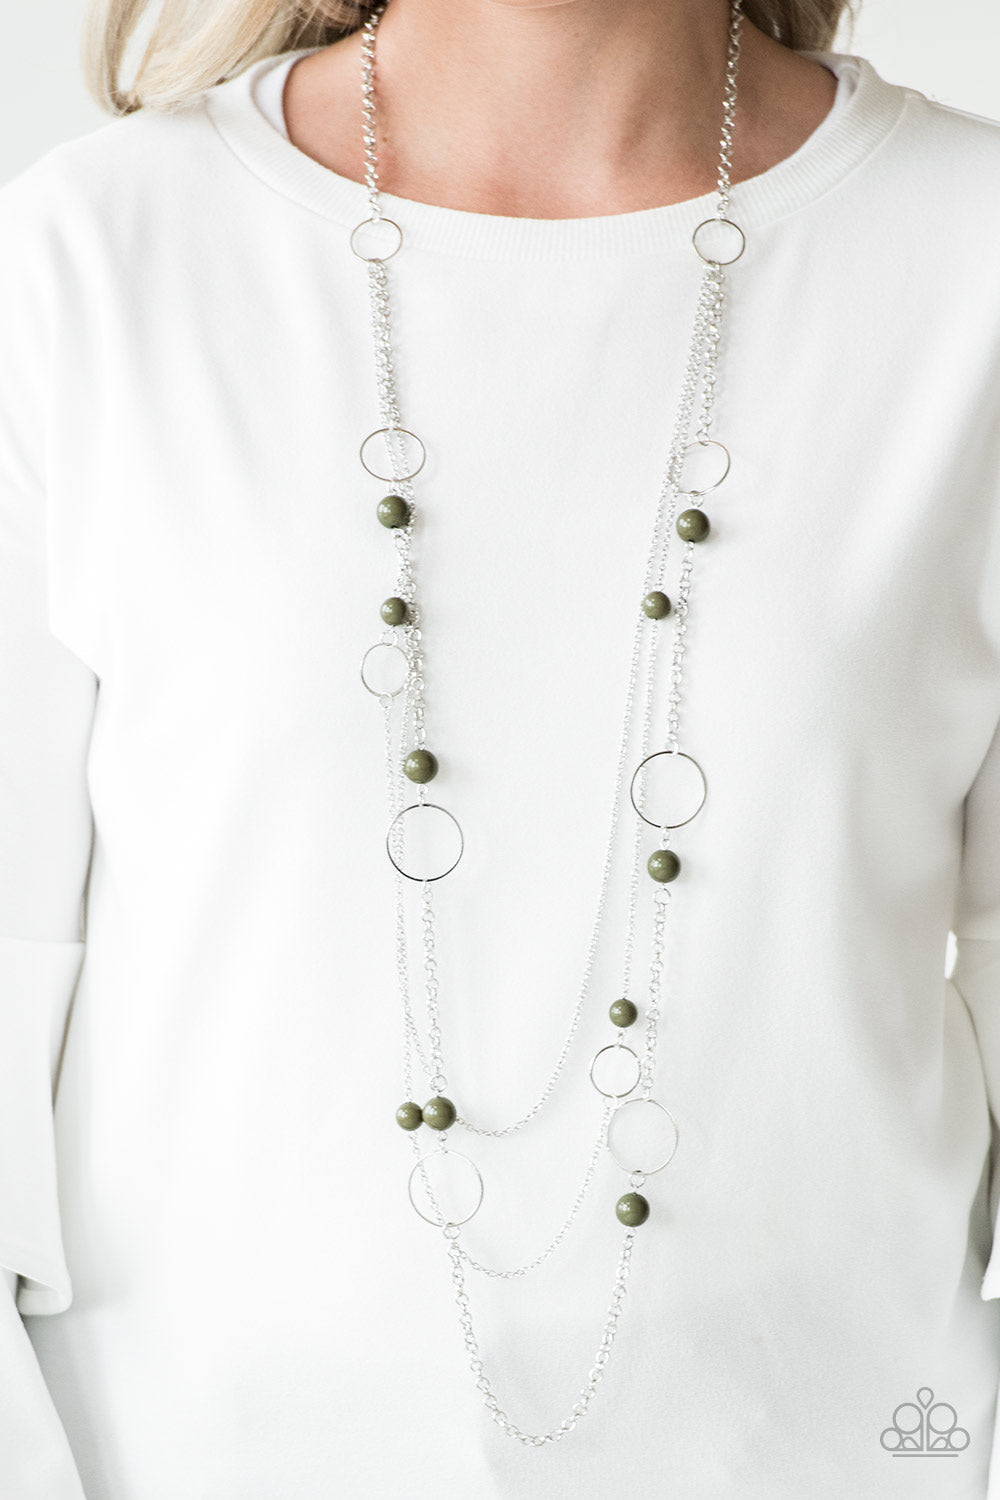 Beachside Babe- Green and Silver Necklace- Paparazzi Accessories